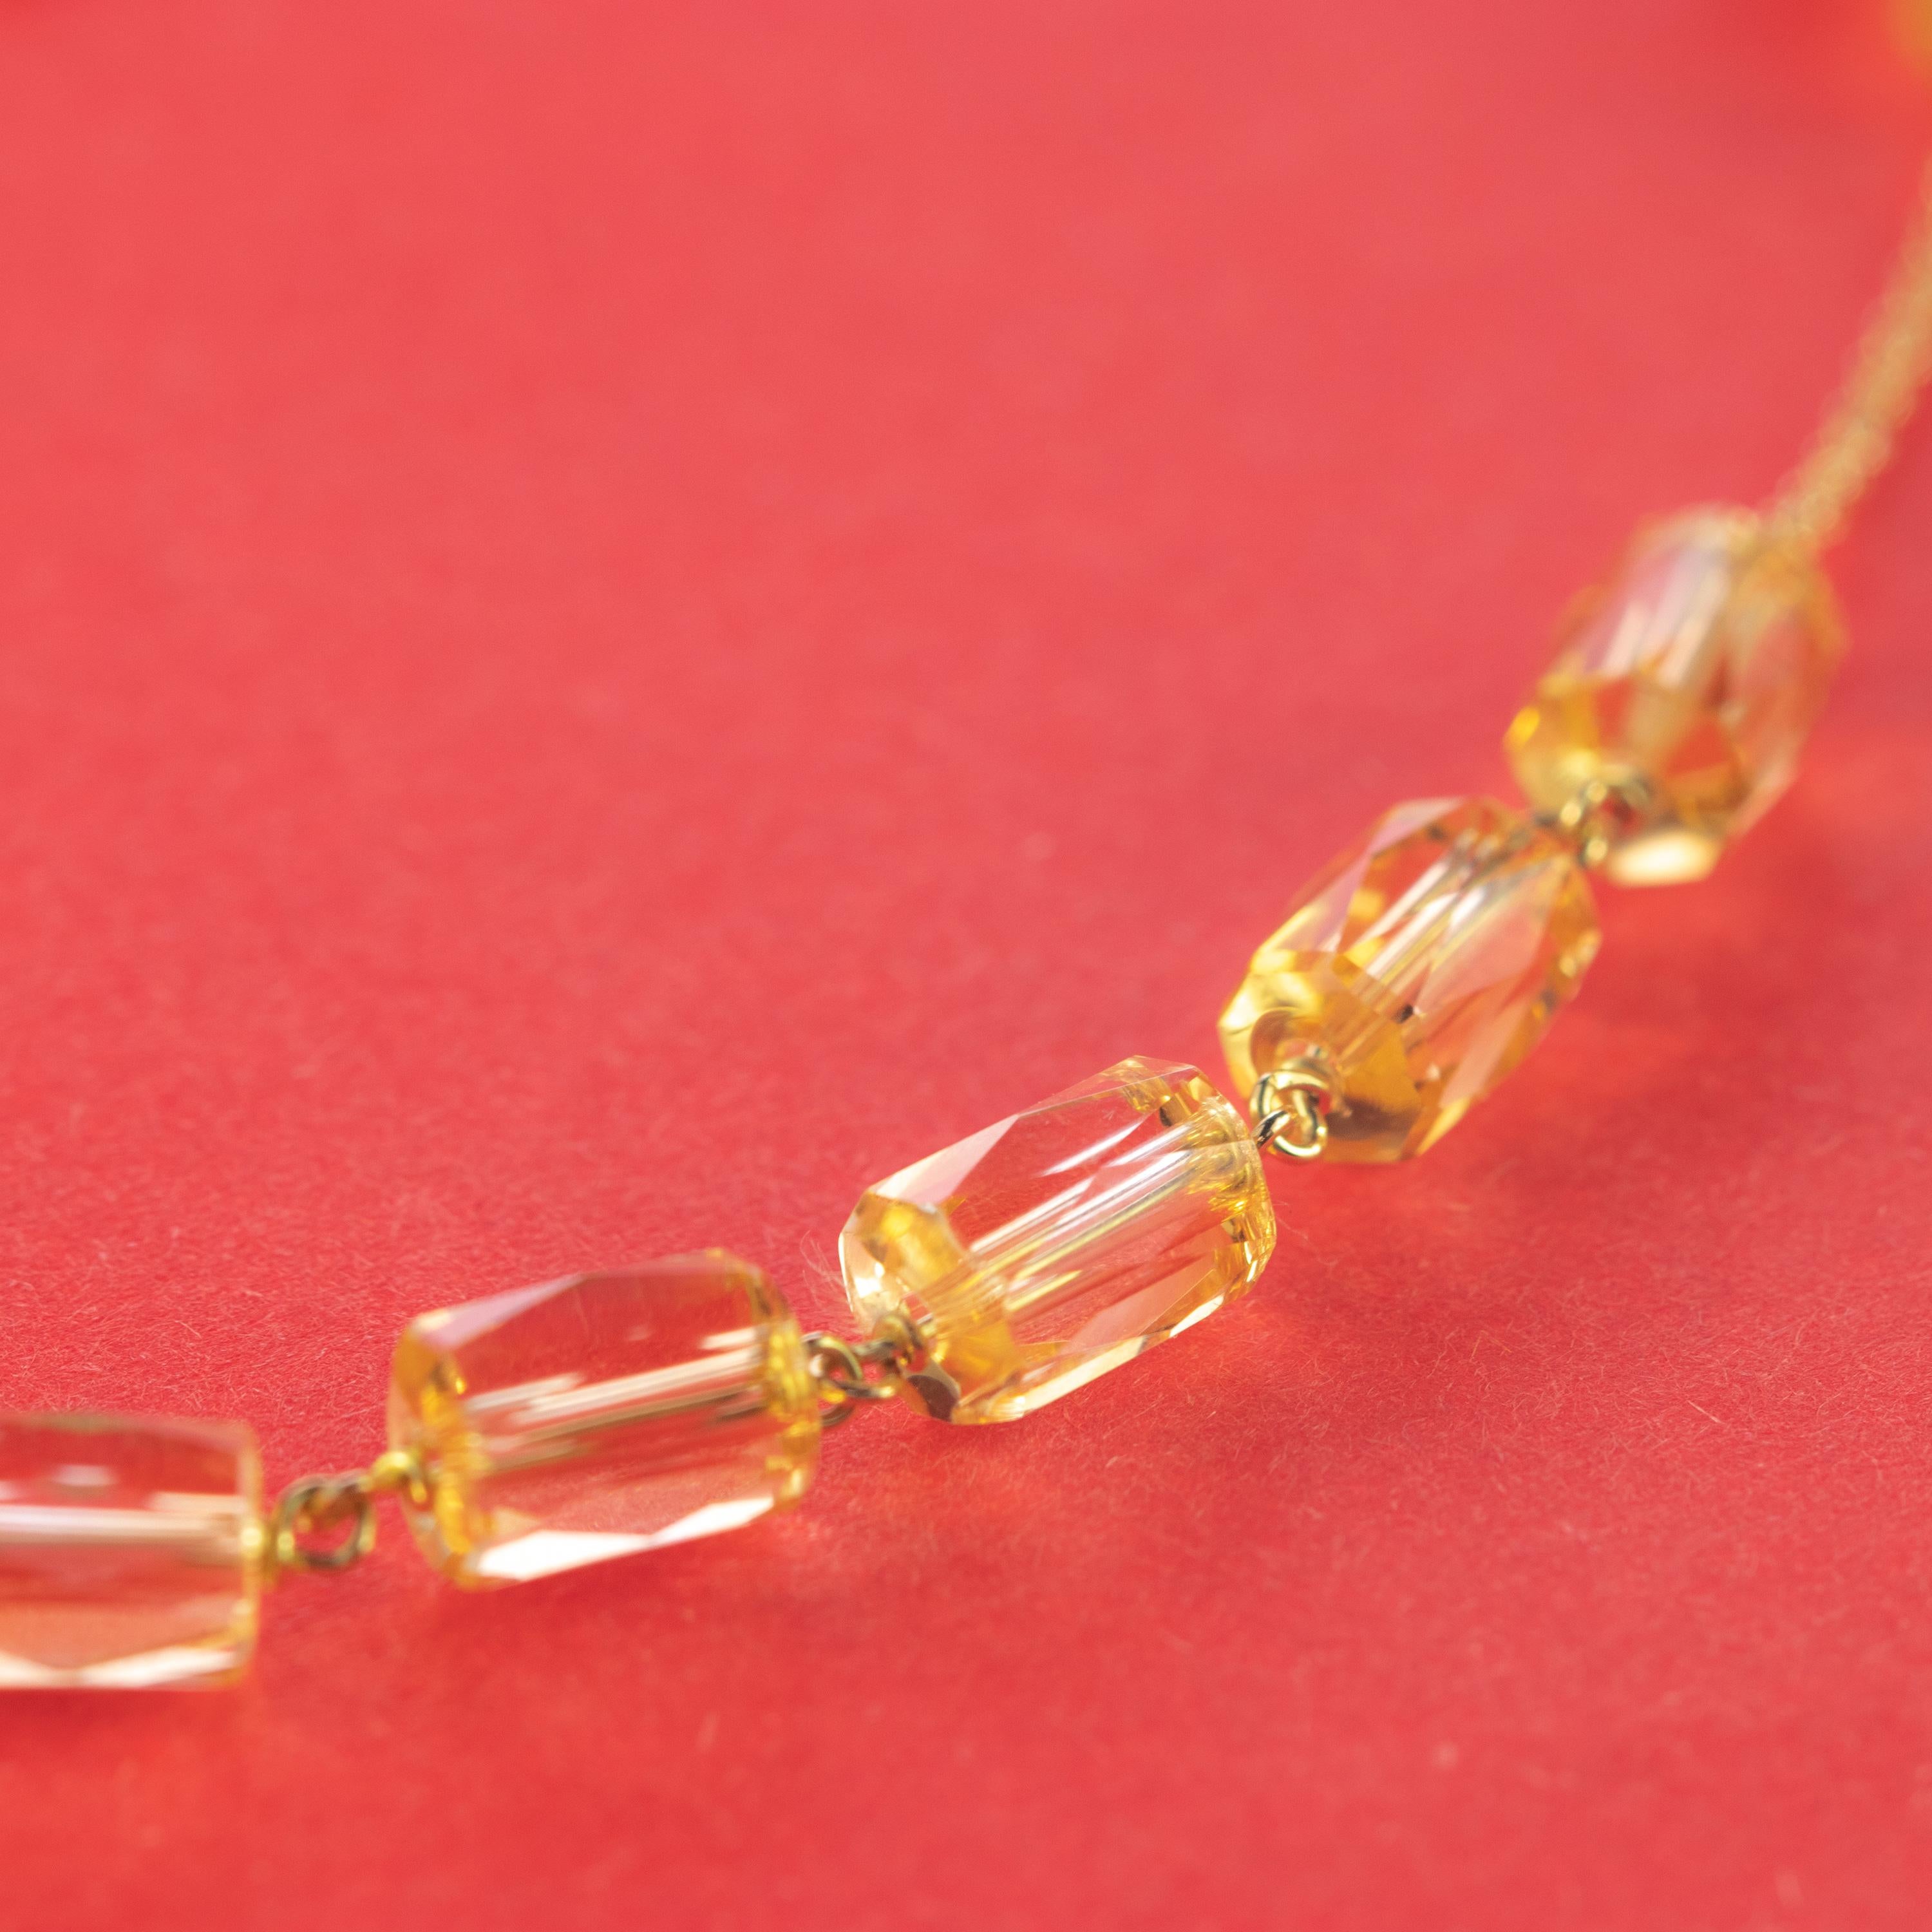 Mixed Cut Intini Jewels Citrine Tubets Beads 9 Karat Yellow Gold Chain Handmade Necklace For Sale